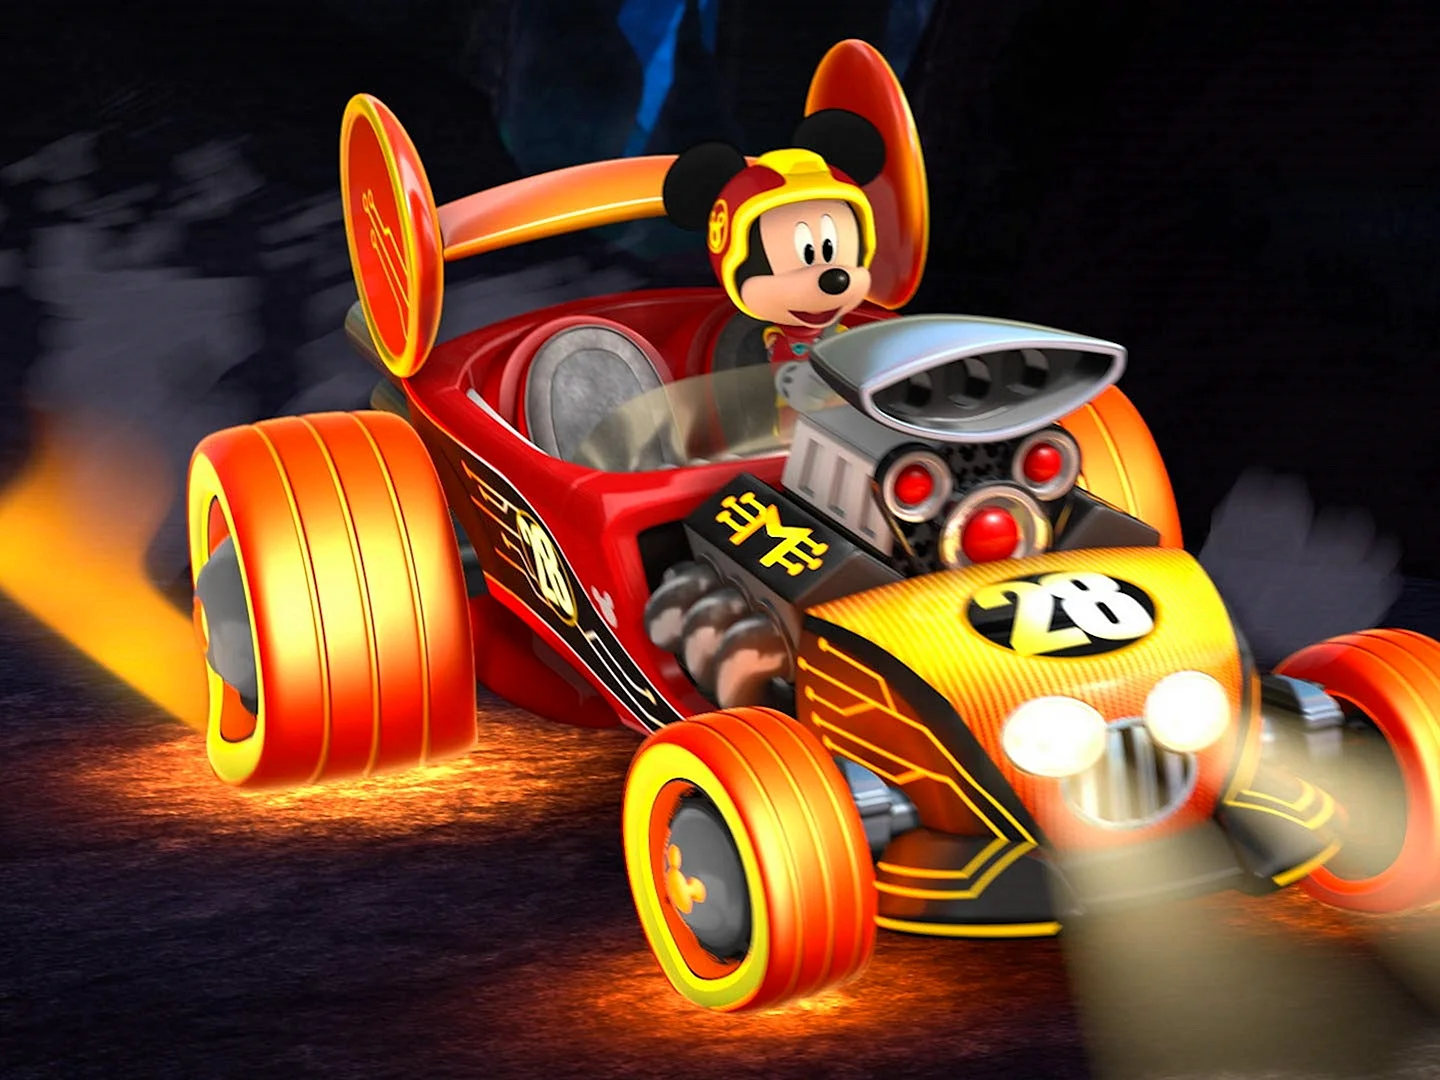 Mickey Mouse Roadster Racers Wallpaper